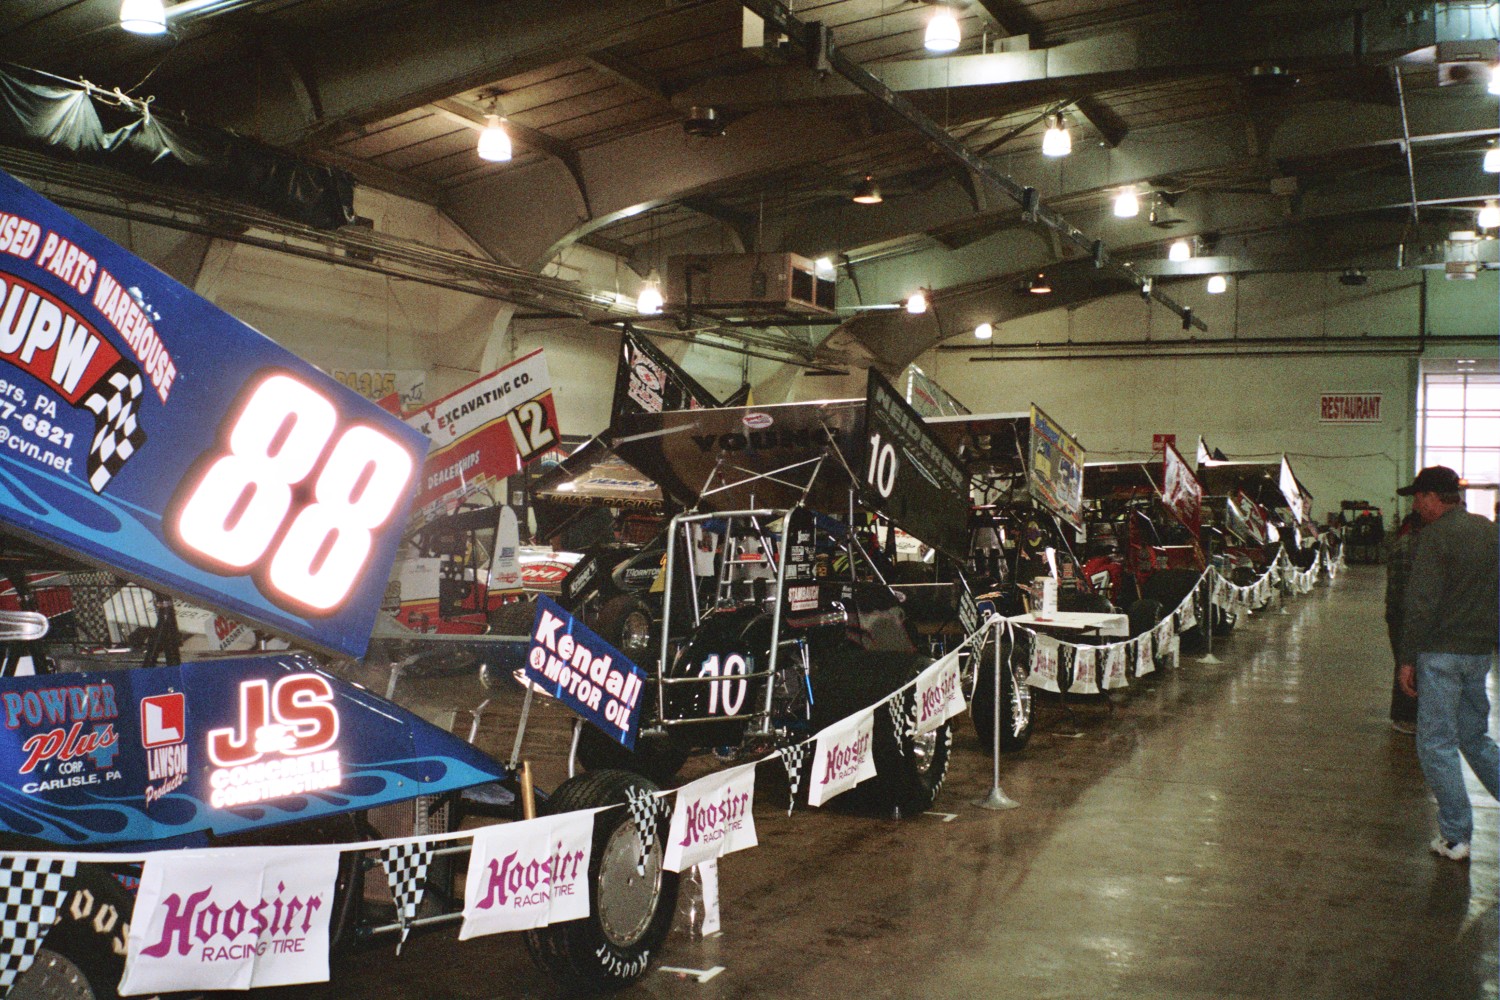 Dirt Trackin 2005
Lots of cars on display
